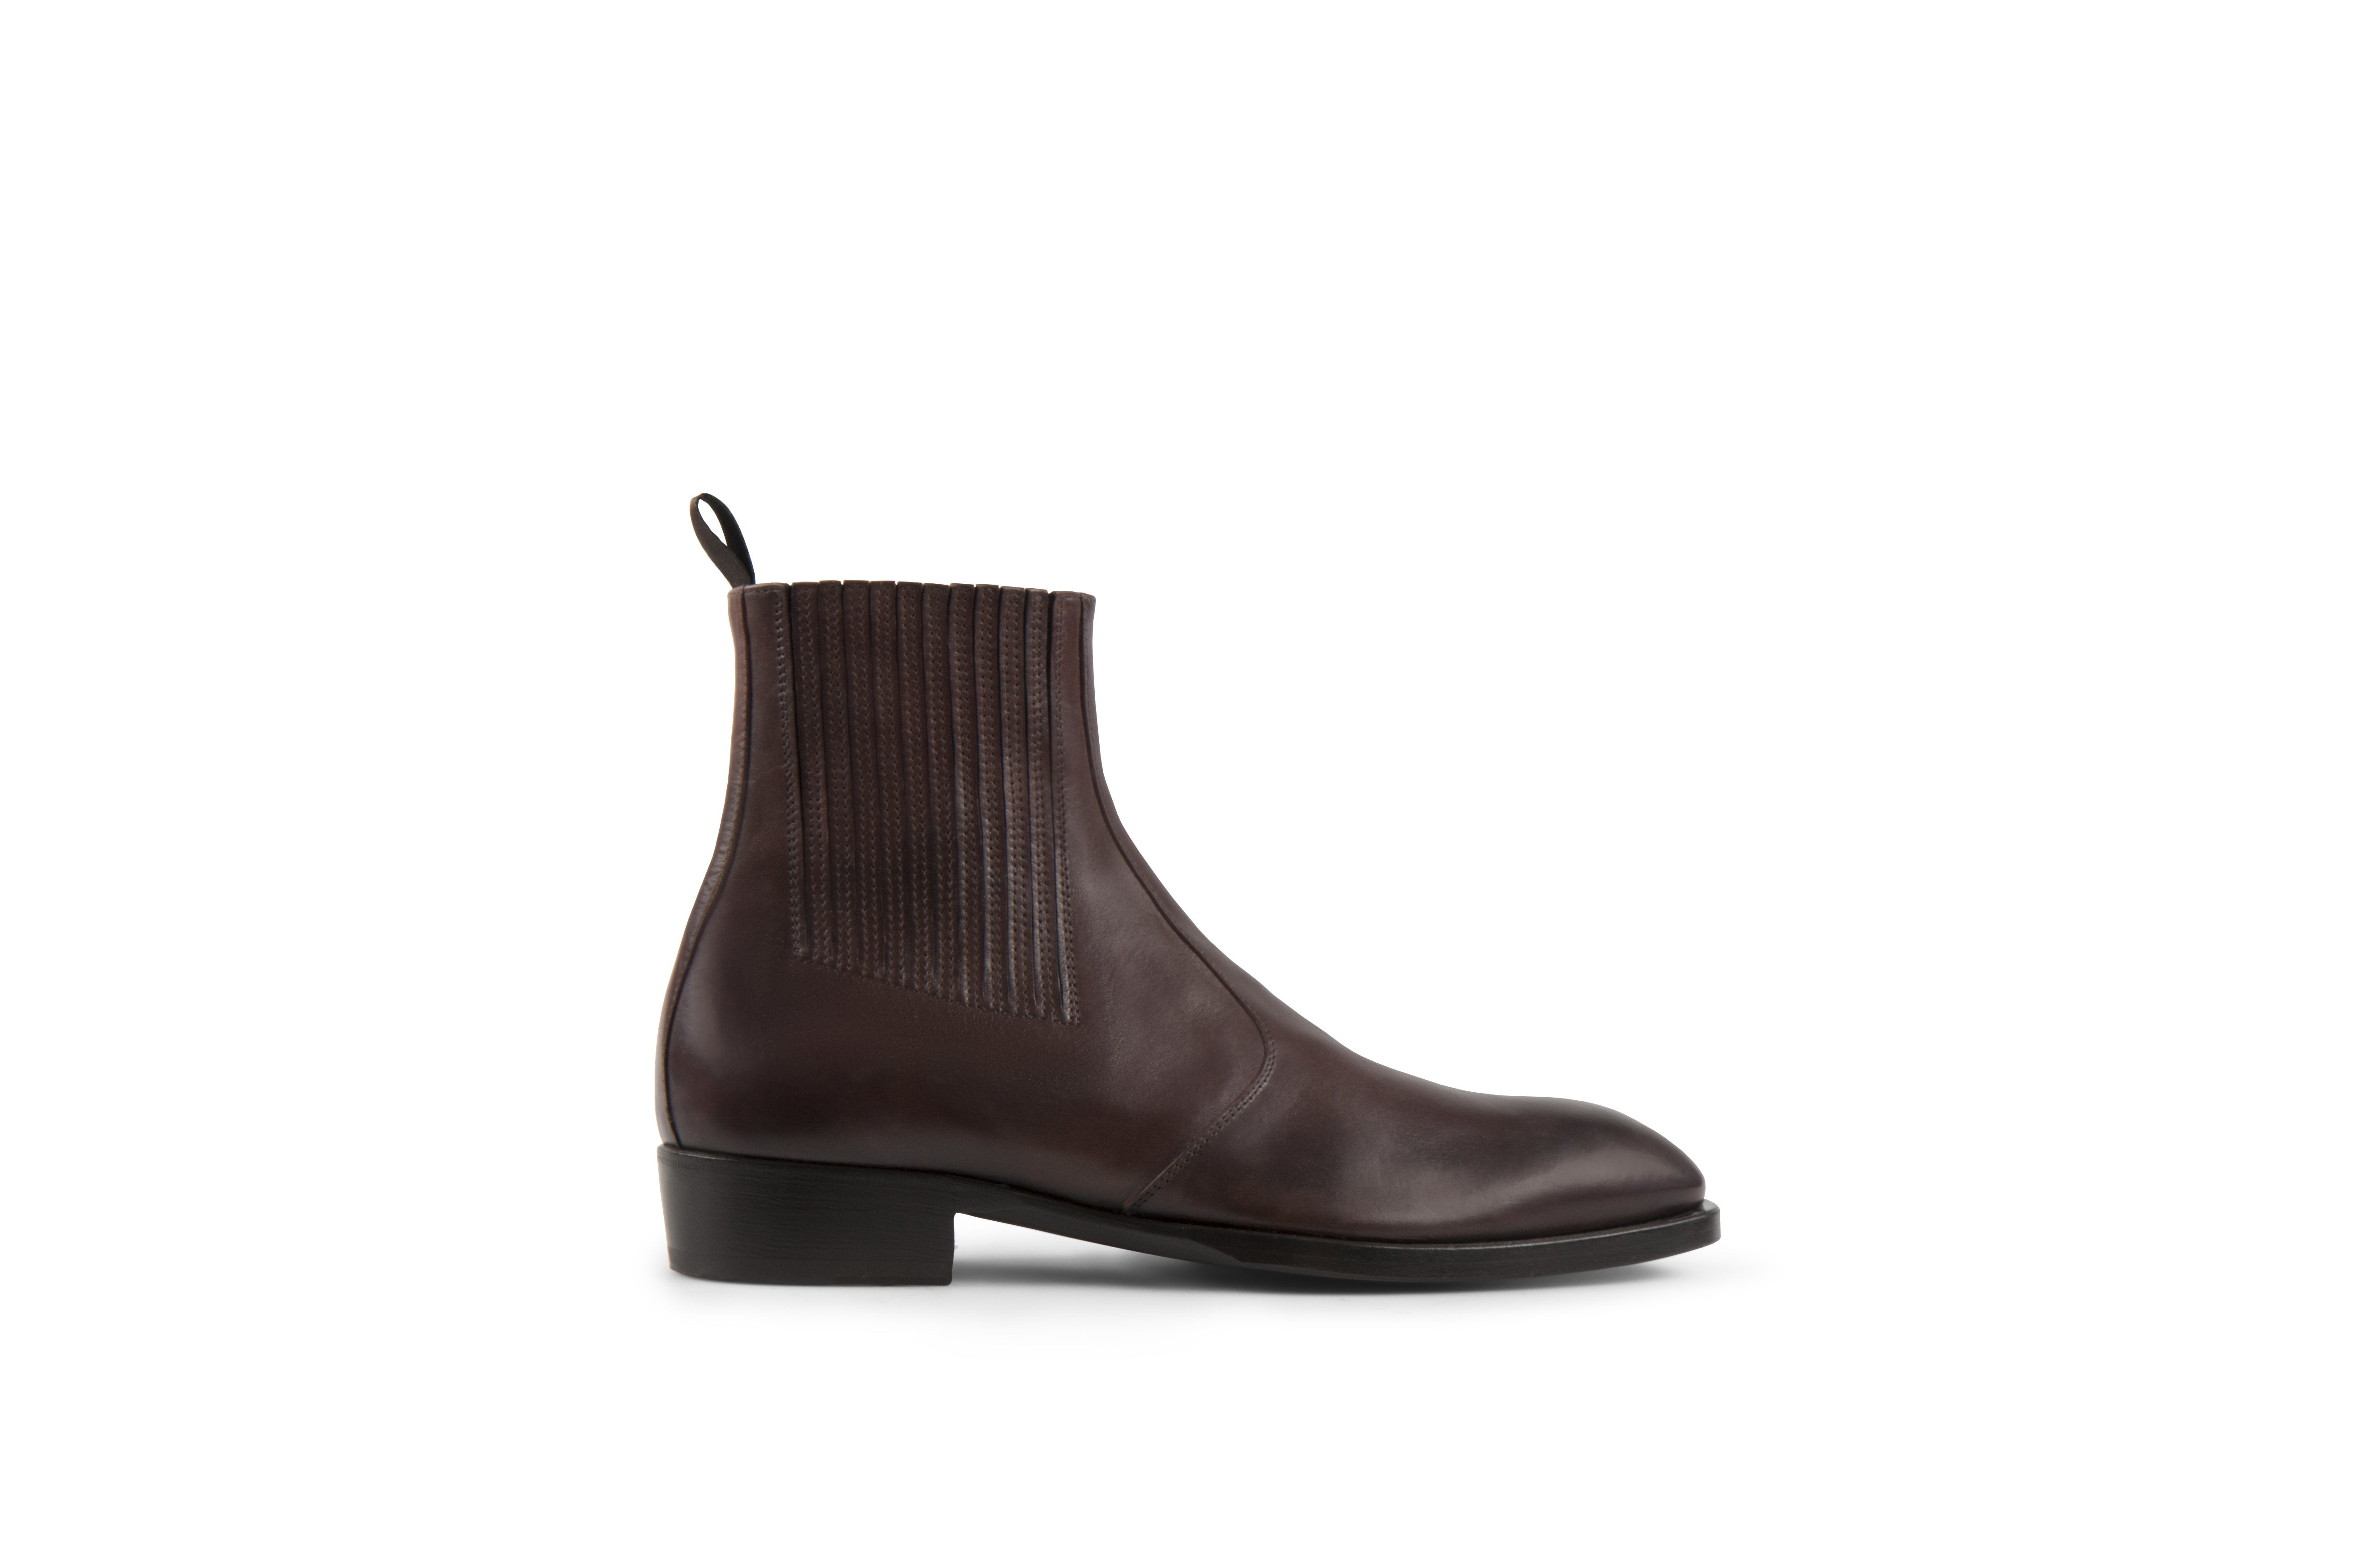 Jay Black Soft Cordovan Leather Chelsea Boots – Project TWLV